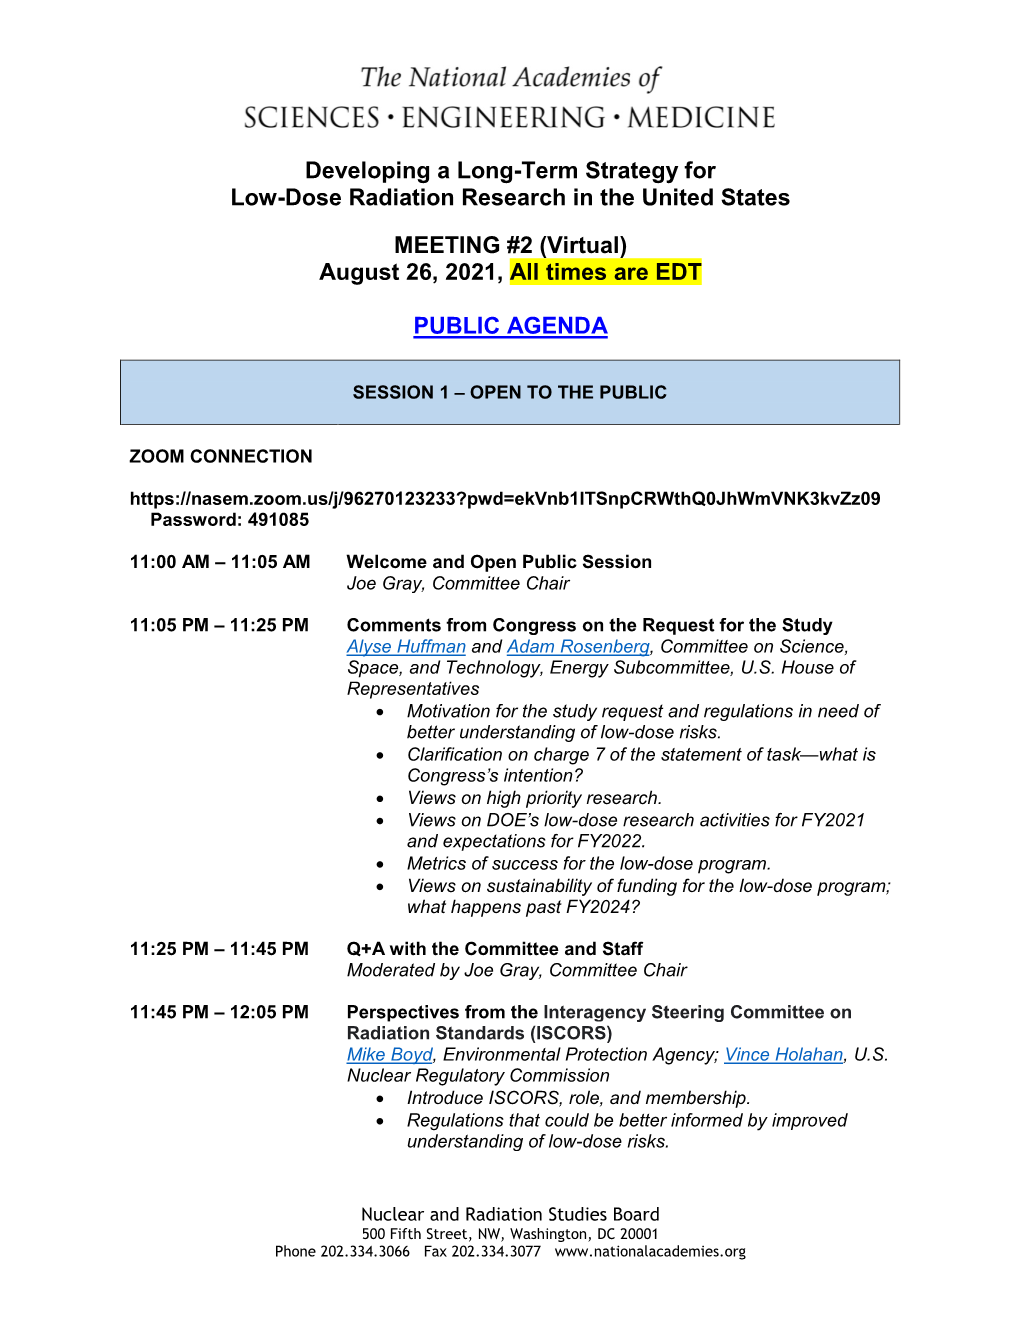 Developing a Long-Term Strategy for Low-Dose Radiation Research in the United States MEETING #2 (Virtual) August 26, 2021